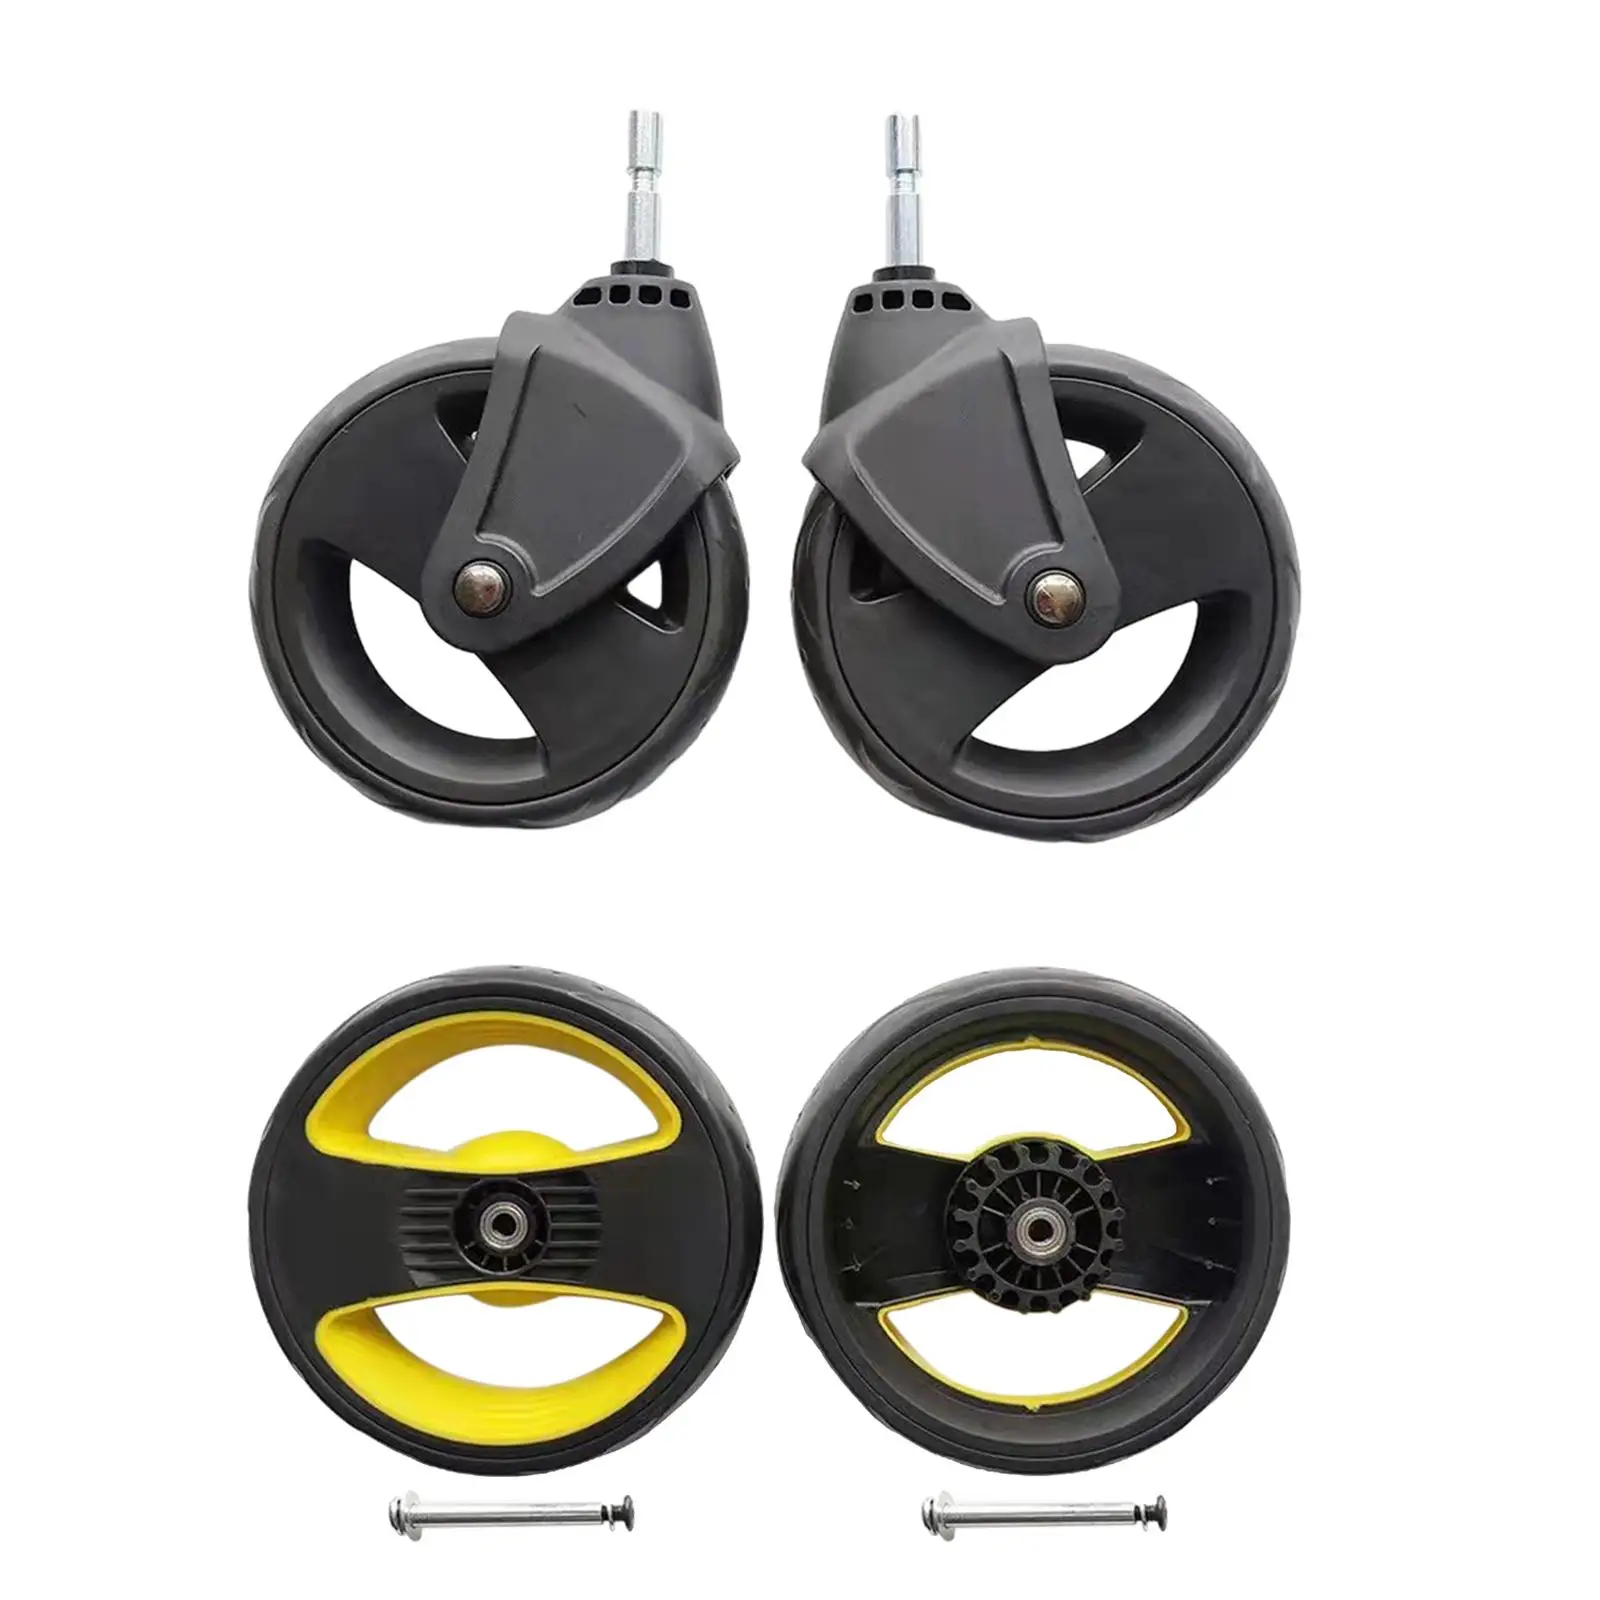 2x Tire Pram Durable for Infant Carriage Wheel Replacement Upgrade Parts Pushchair Accessories Trolley Wheel Trolley Wheel Set